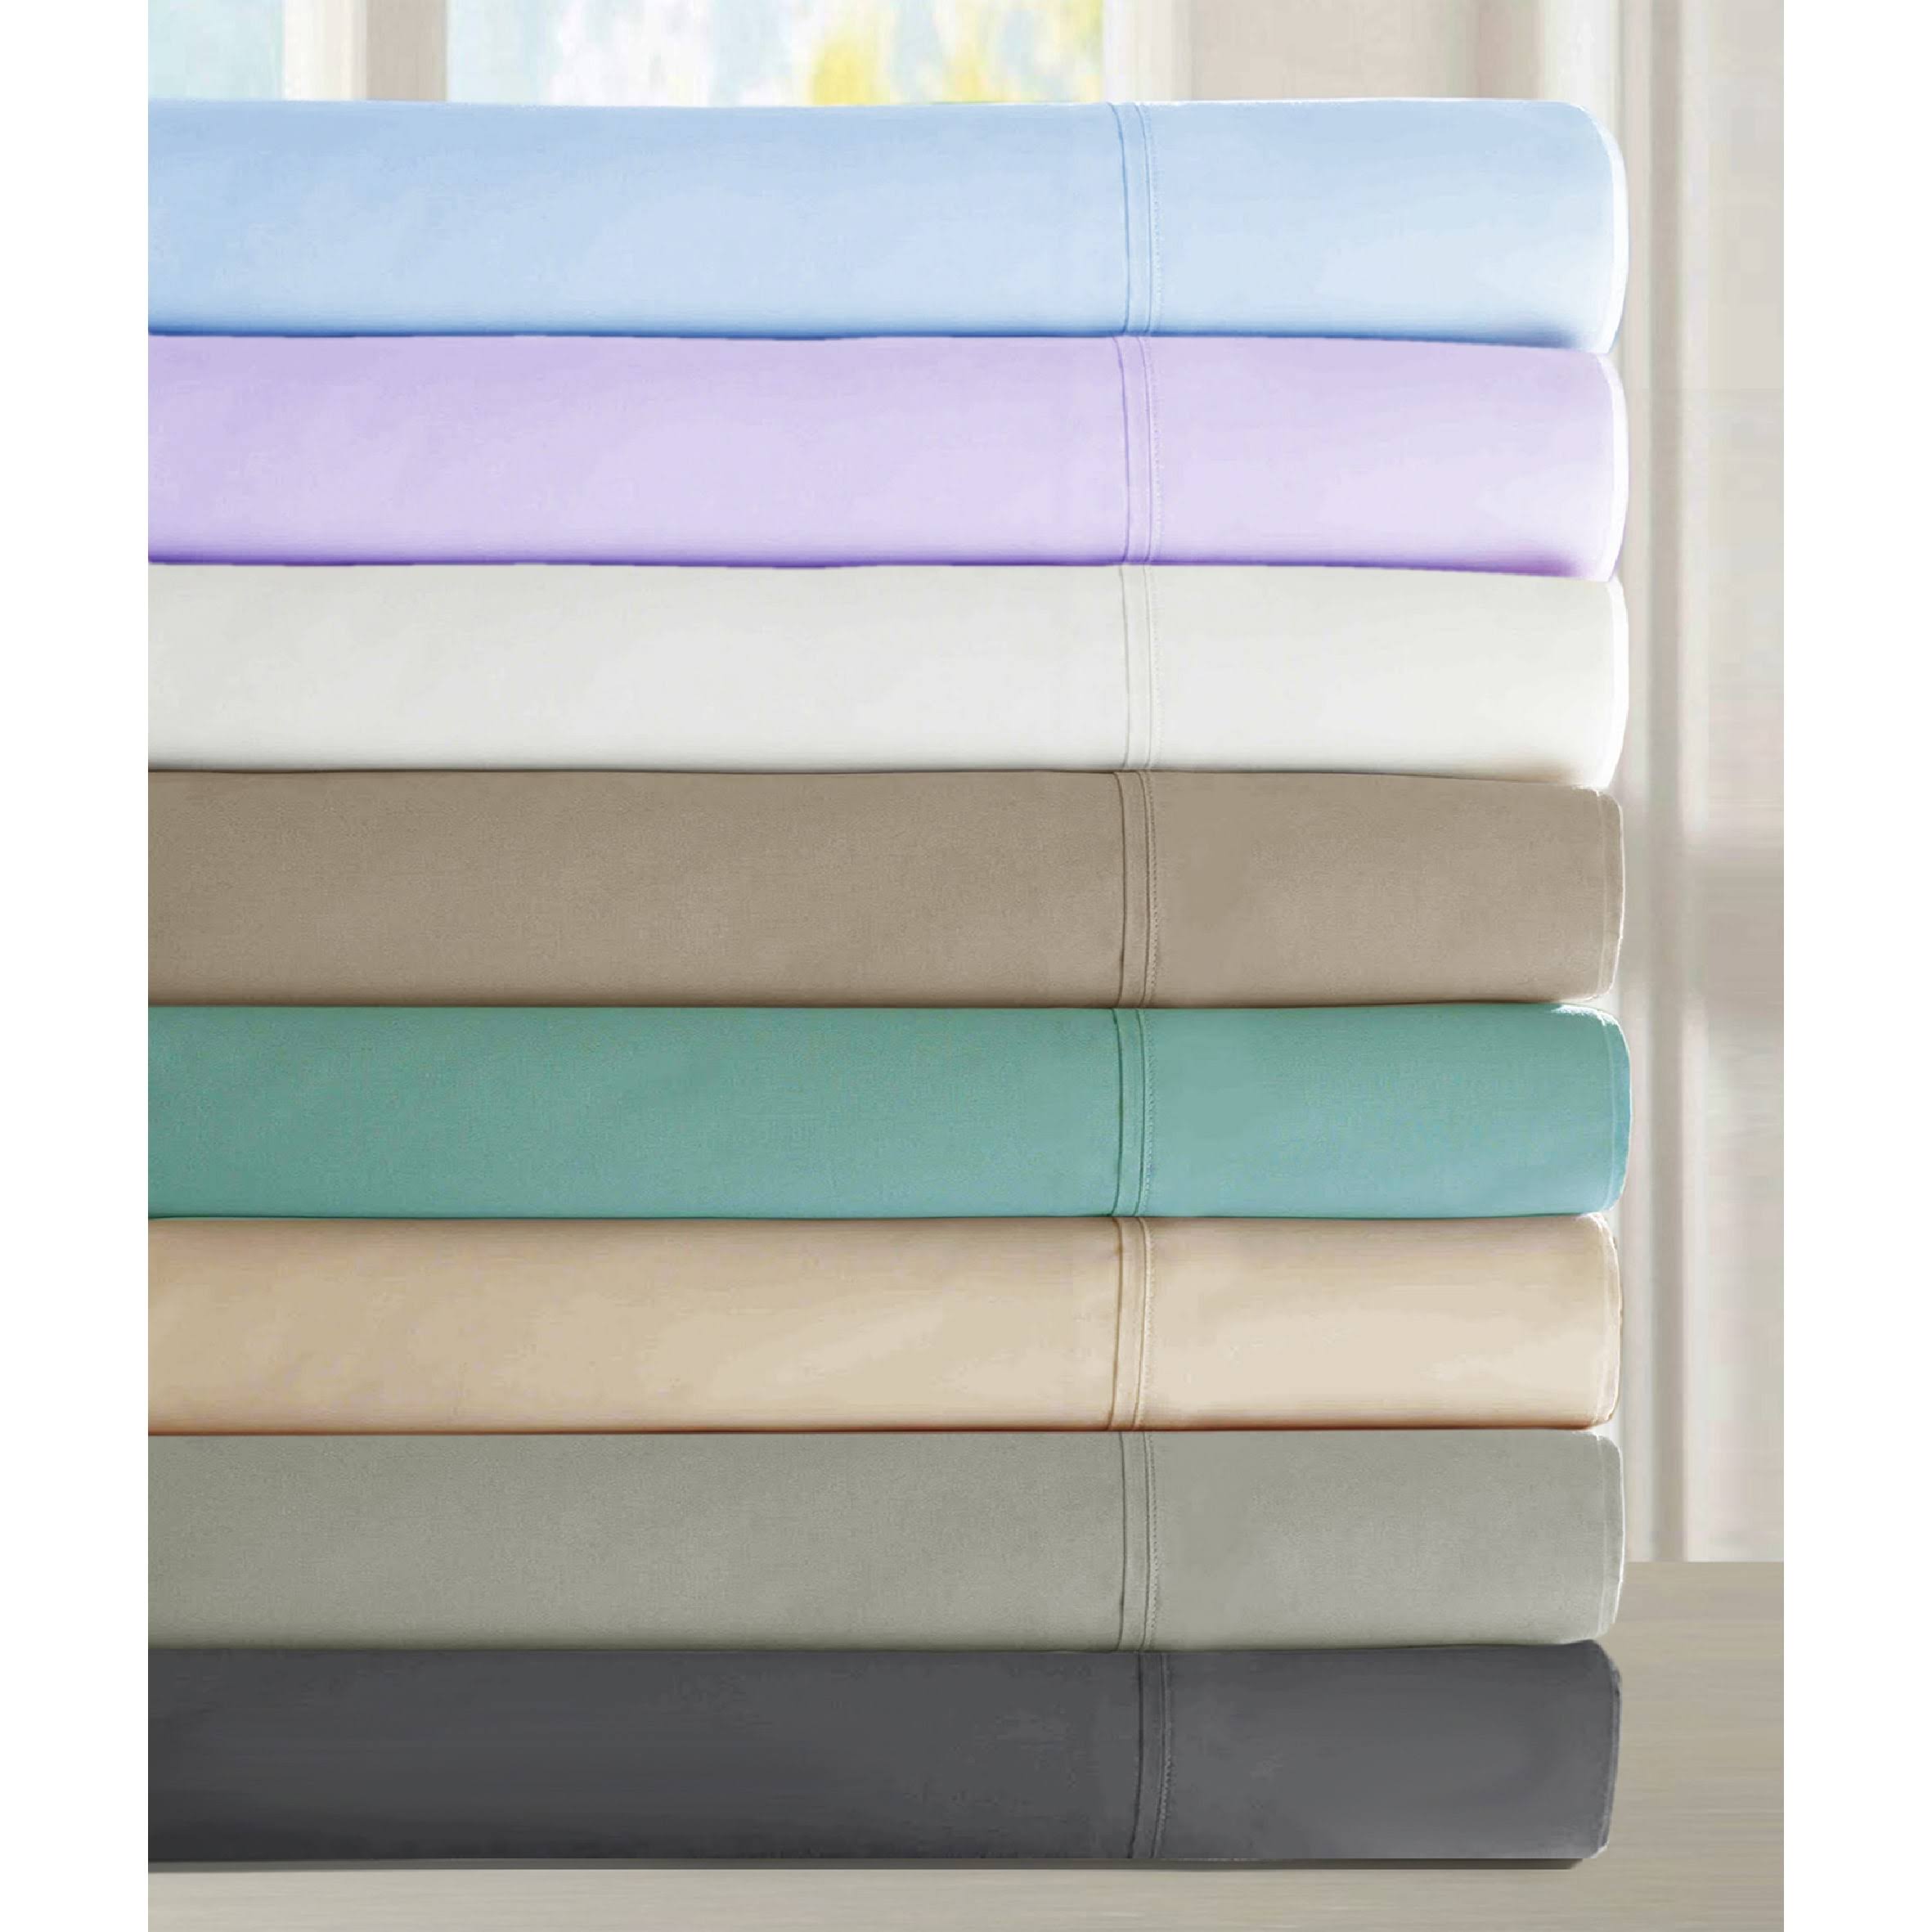 Addy Home Fashions Luxury 300 Thread Count Cotton Deep Pocket Sheet Set (6 Pieces) (Blue - King)